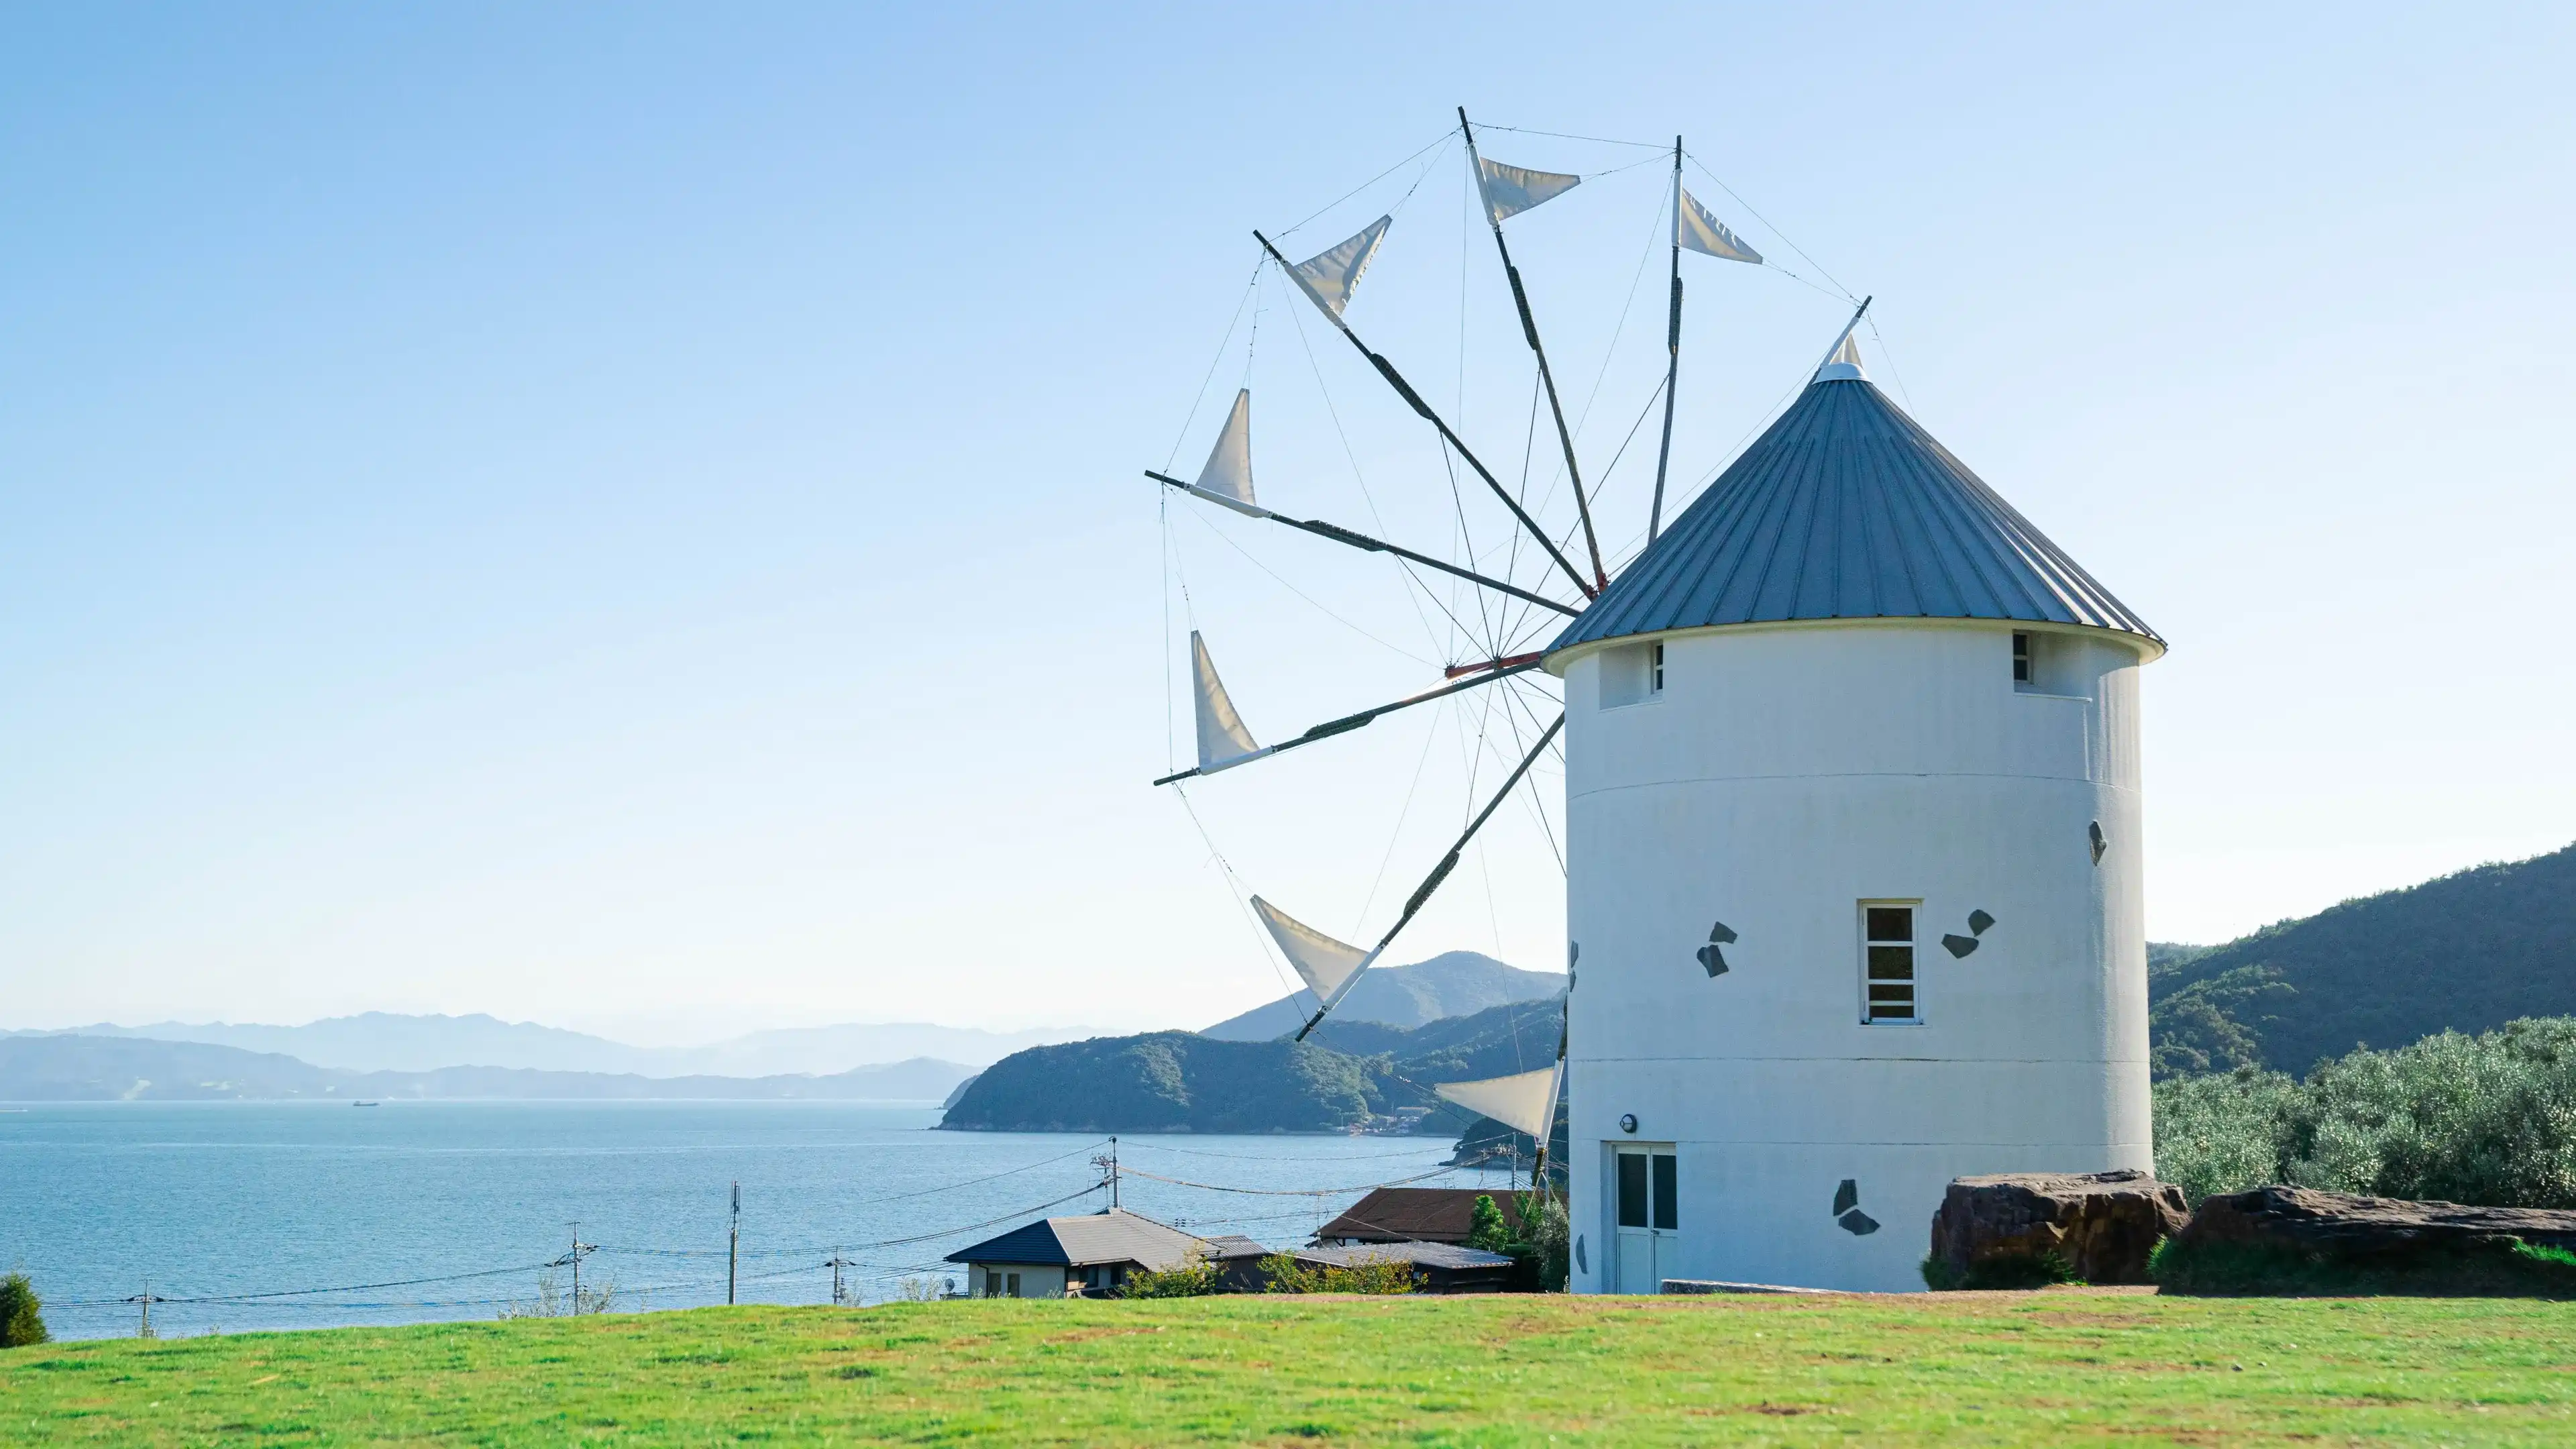 Greek Windmill. Roadside station "Olive park" on Shodoshima, Kagawa Prefecture, Japan. Shodoshima is considered the birthplace of olive cultivation in Japan.